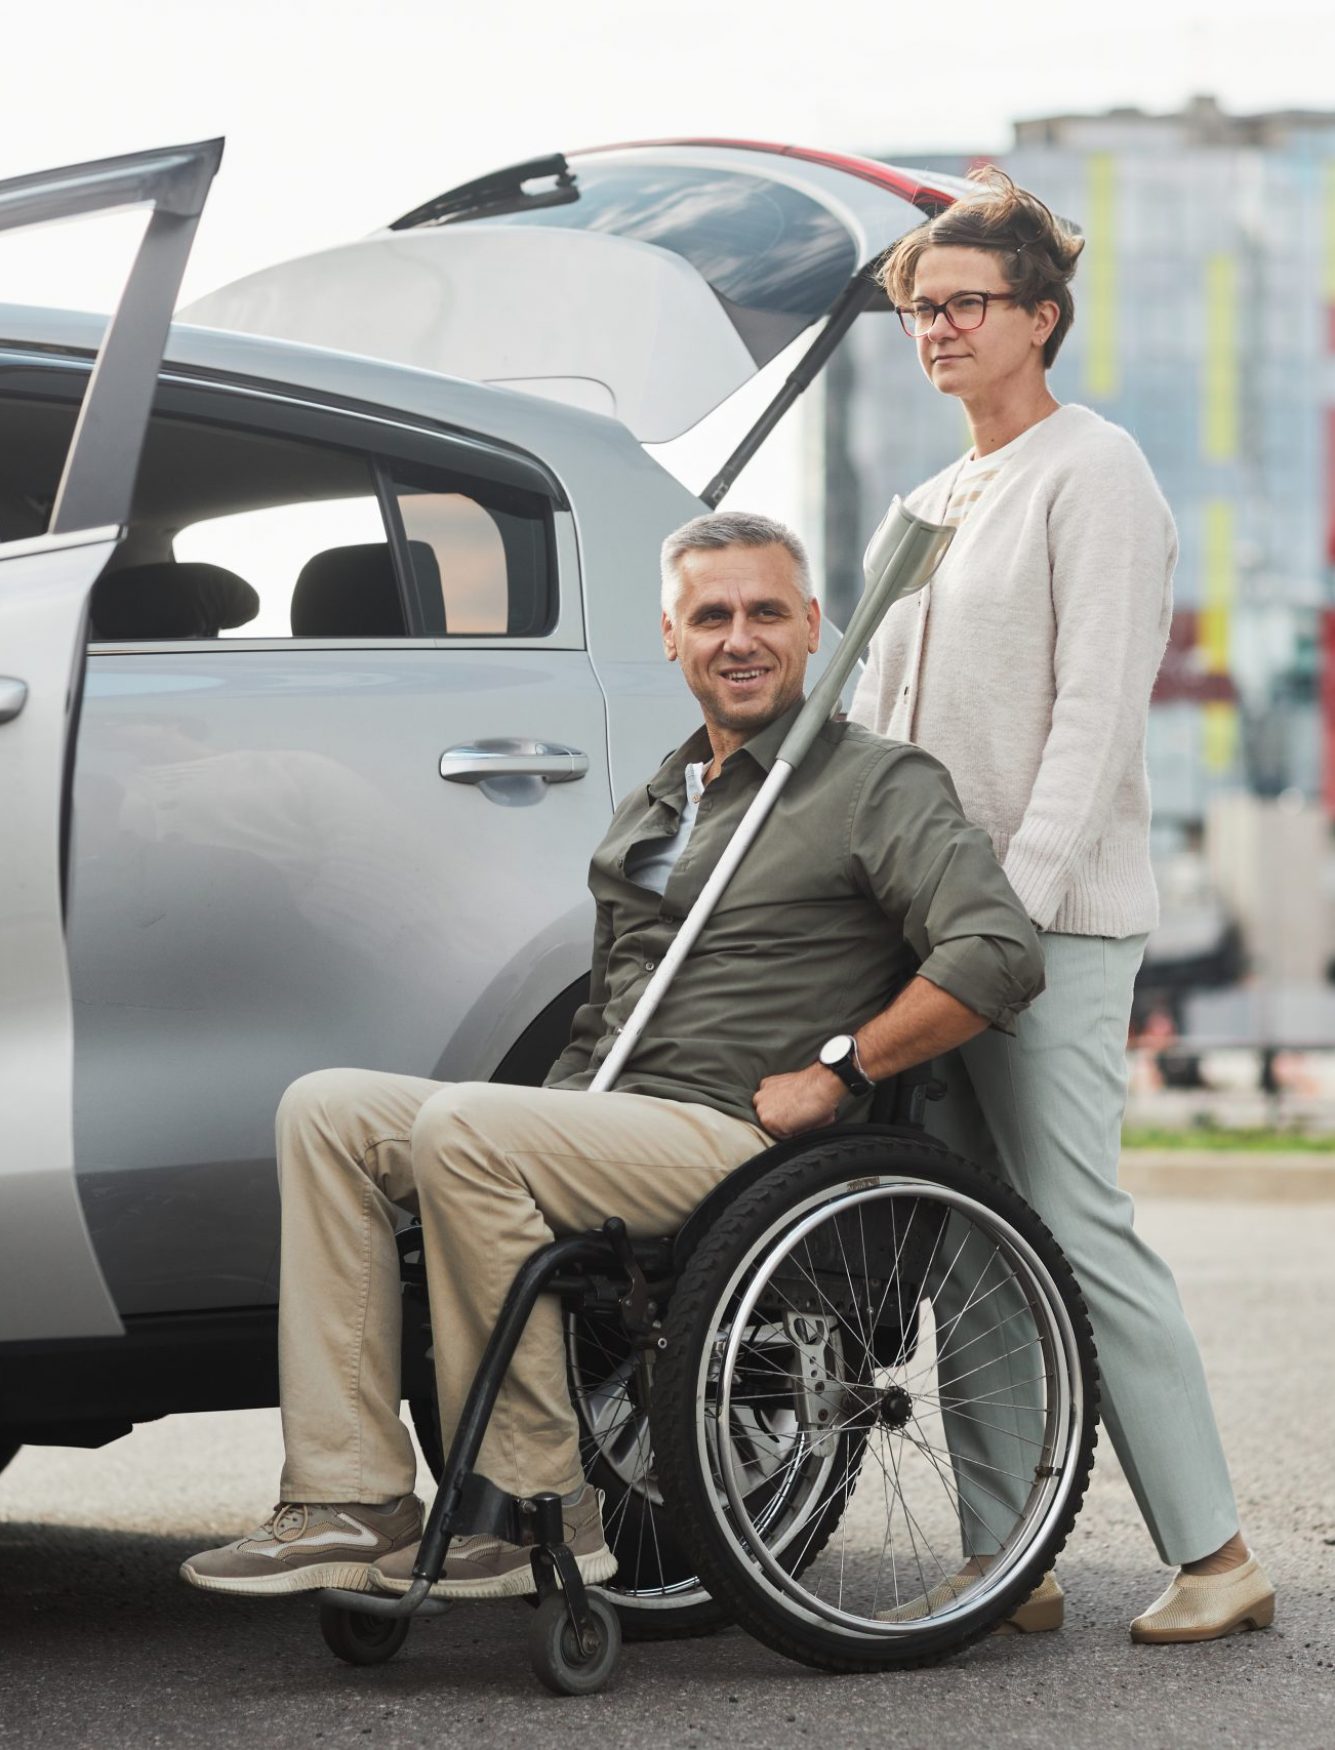 Smiling Driver with Man in Wheelchair by Car